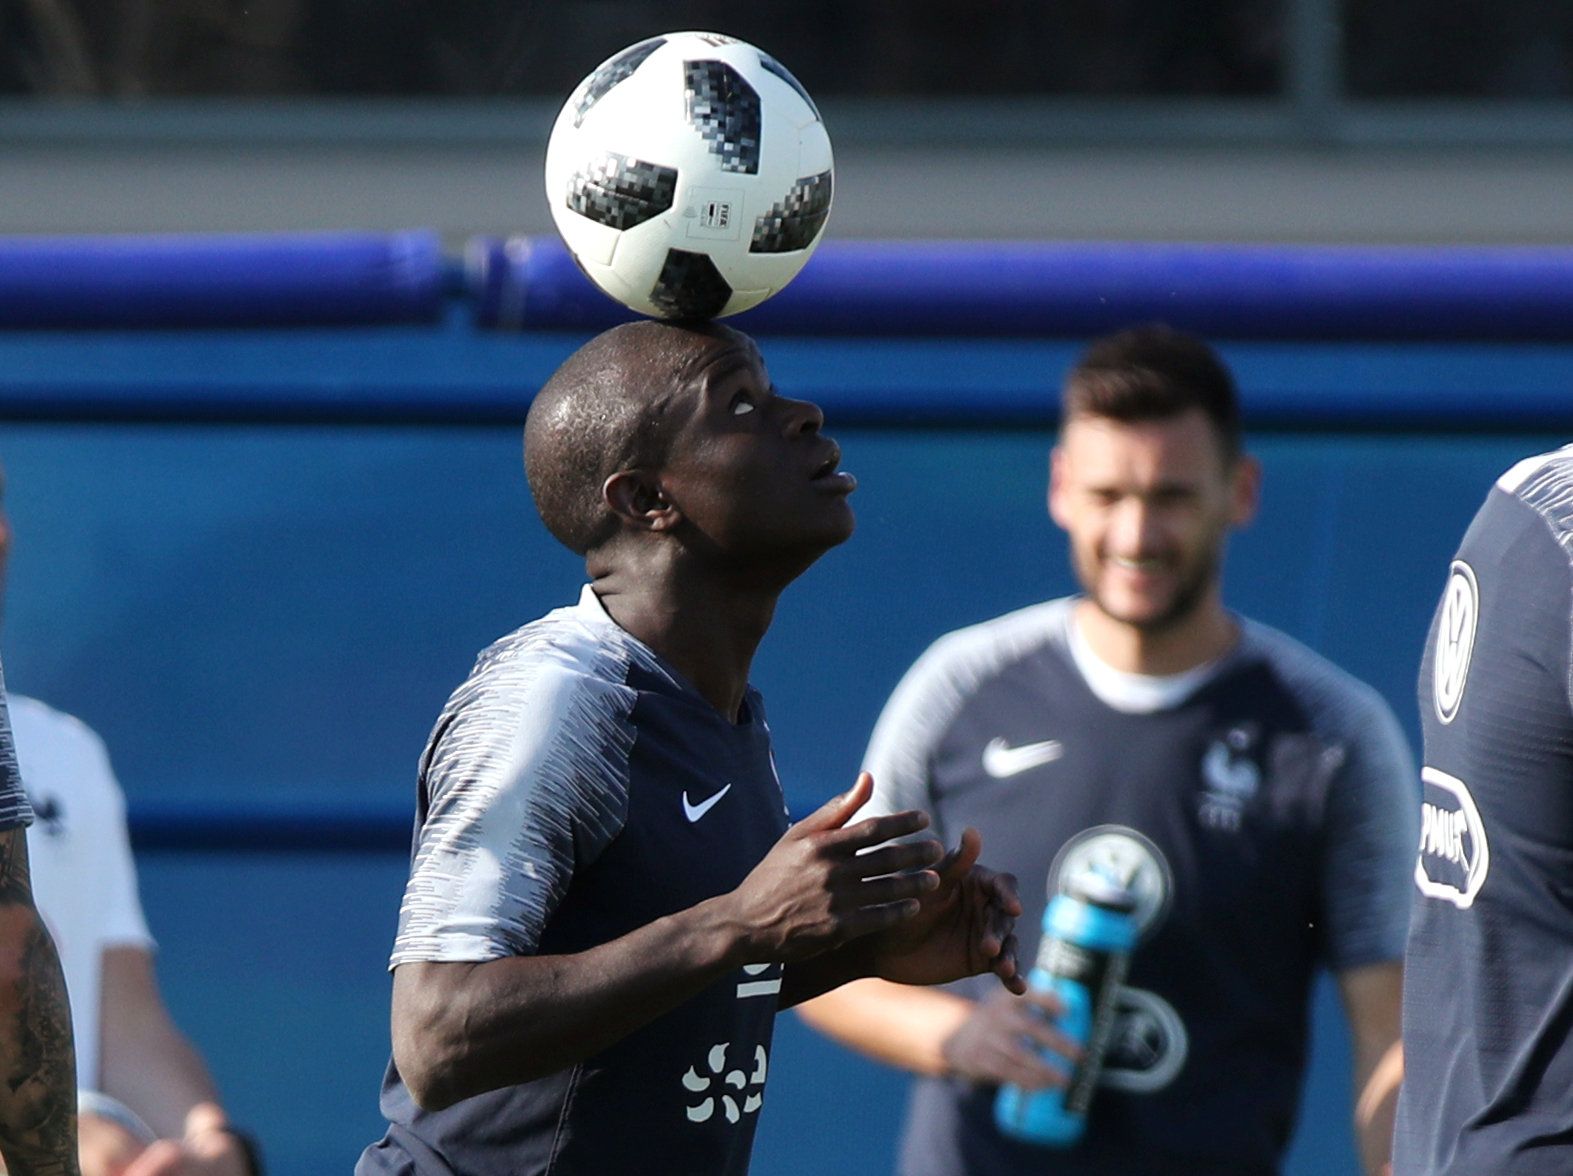 Soccer Football - World Cup - France Training - France Training Camp, Moscow, Russia - June 18, 2018   France's N'Golo Kante during training   REUTERS/Albert Gea